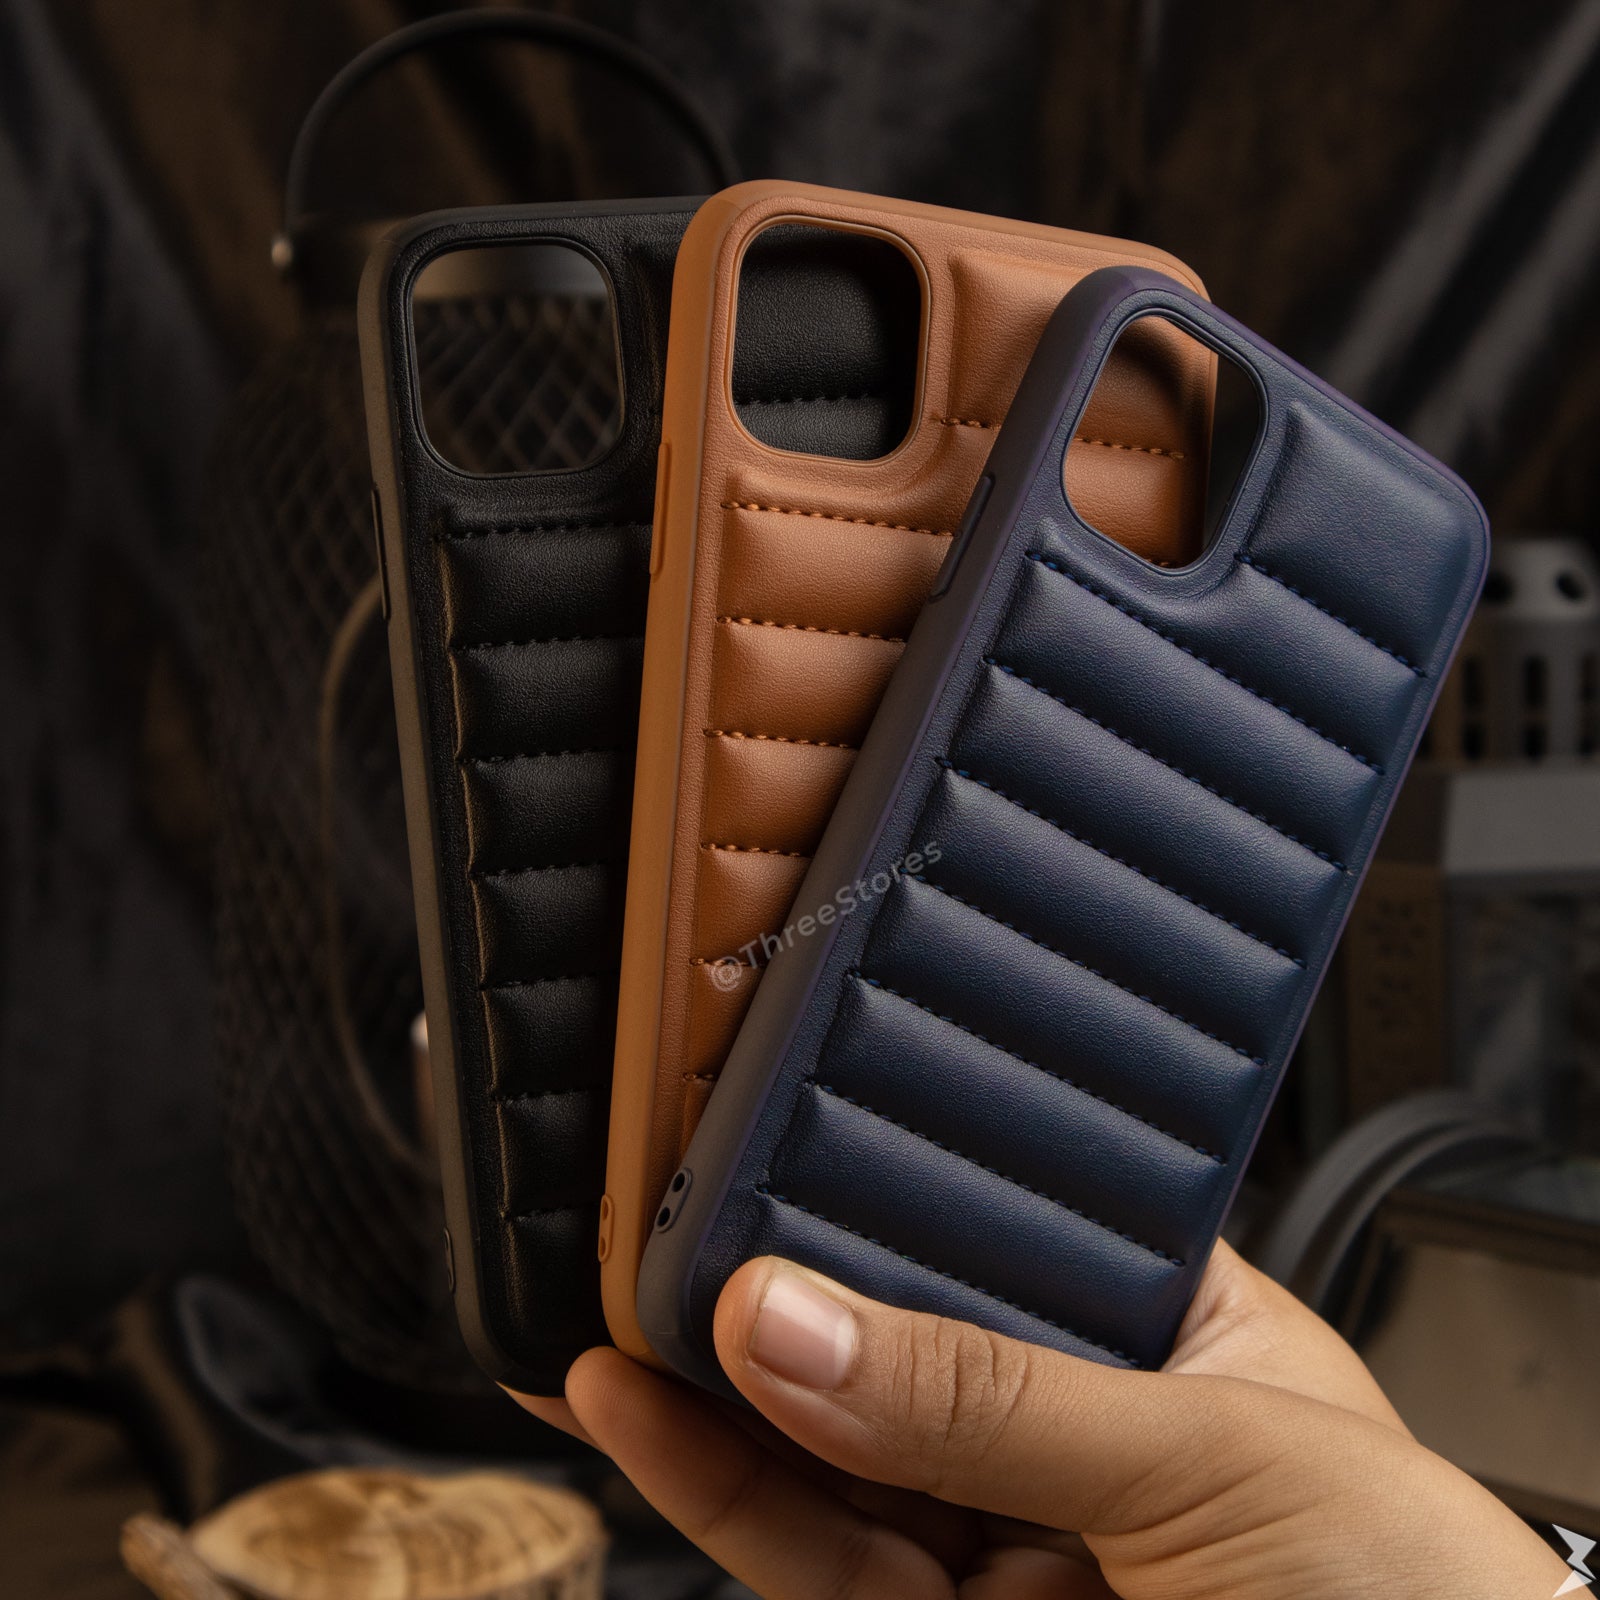 HDD Wave Leather Case iPhone 11